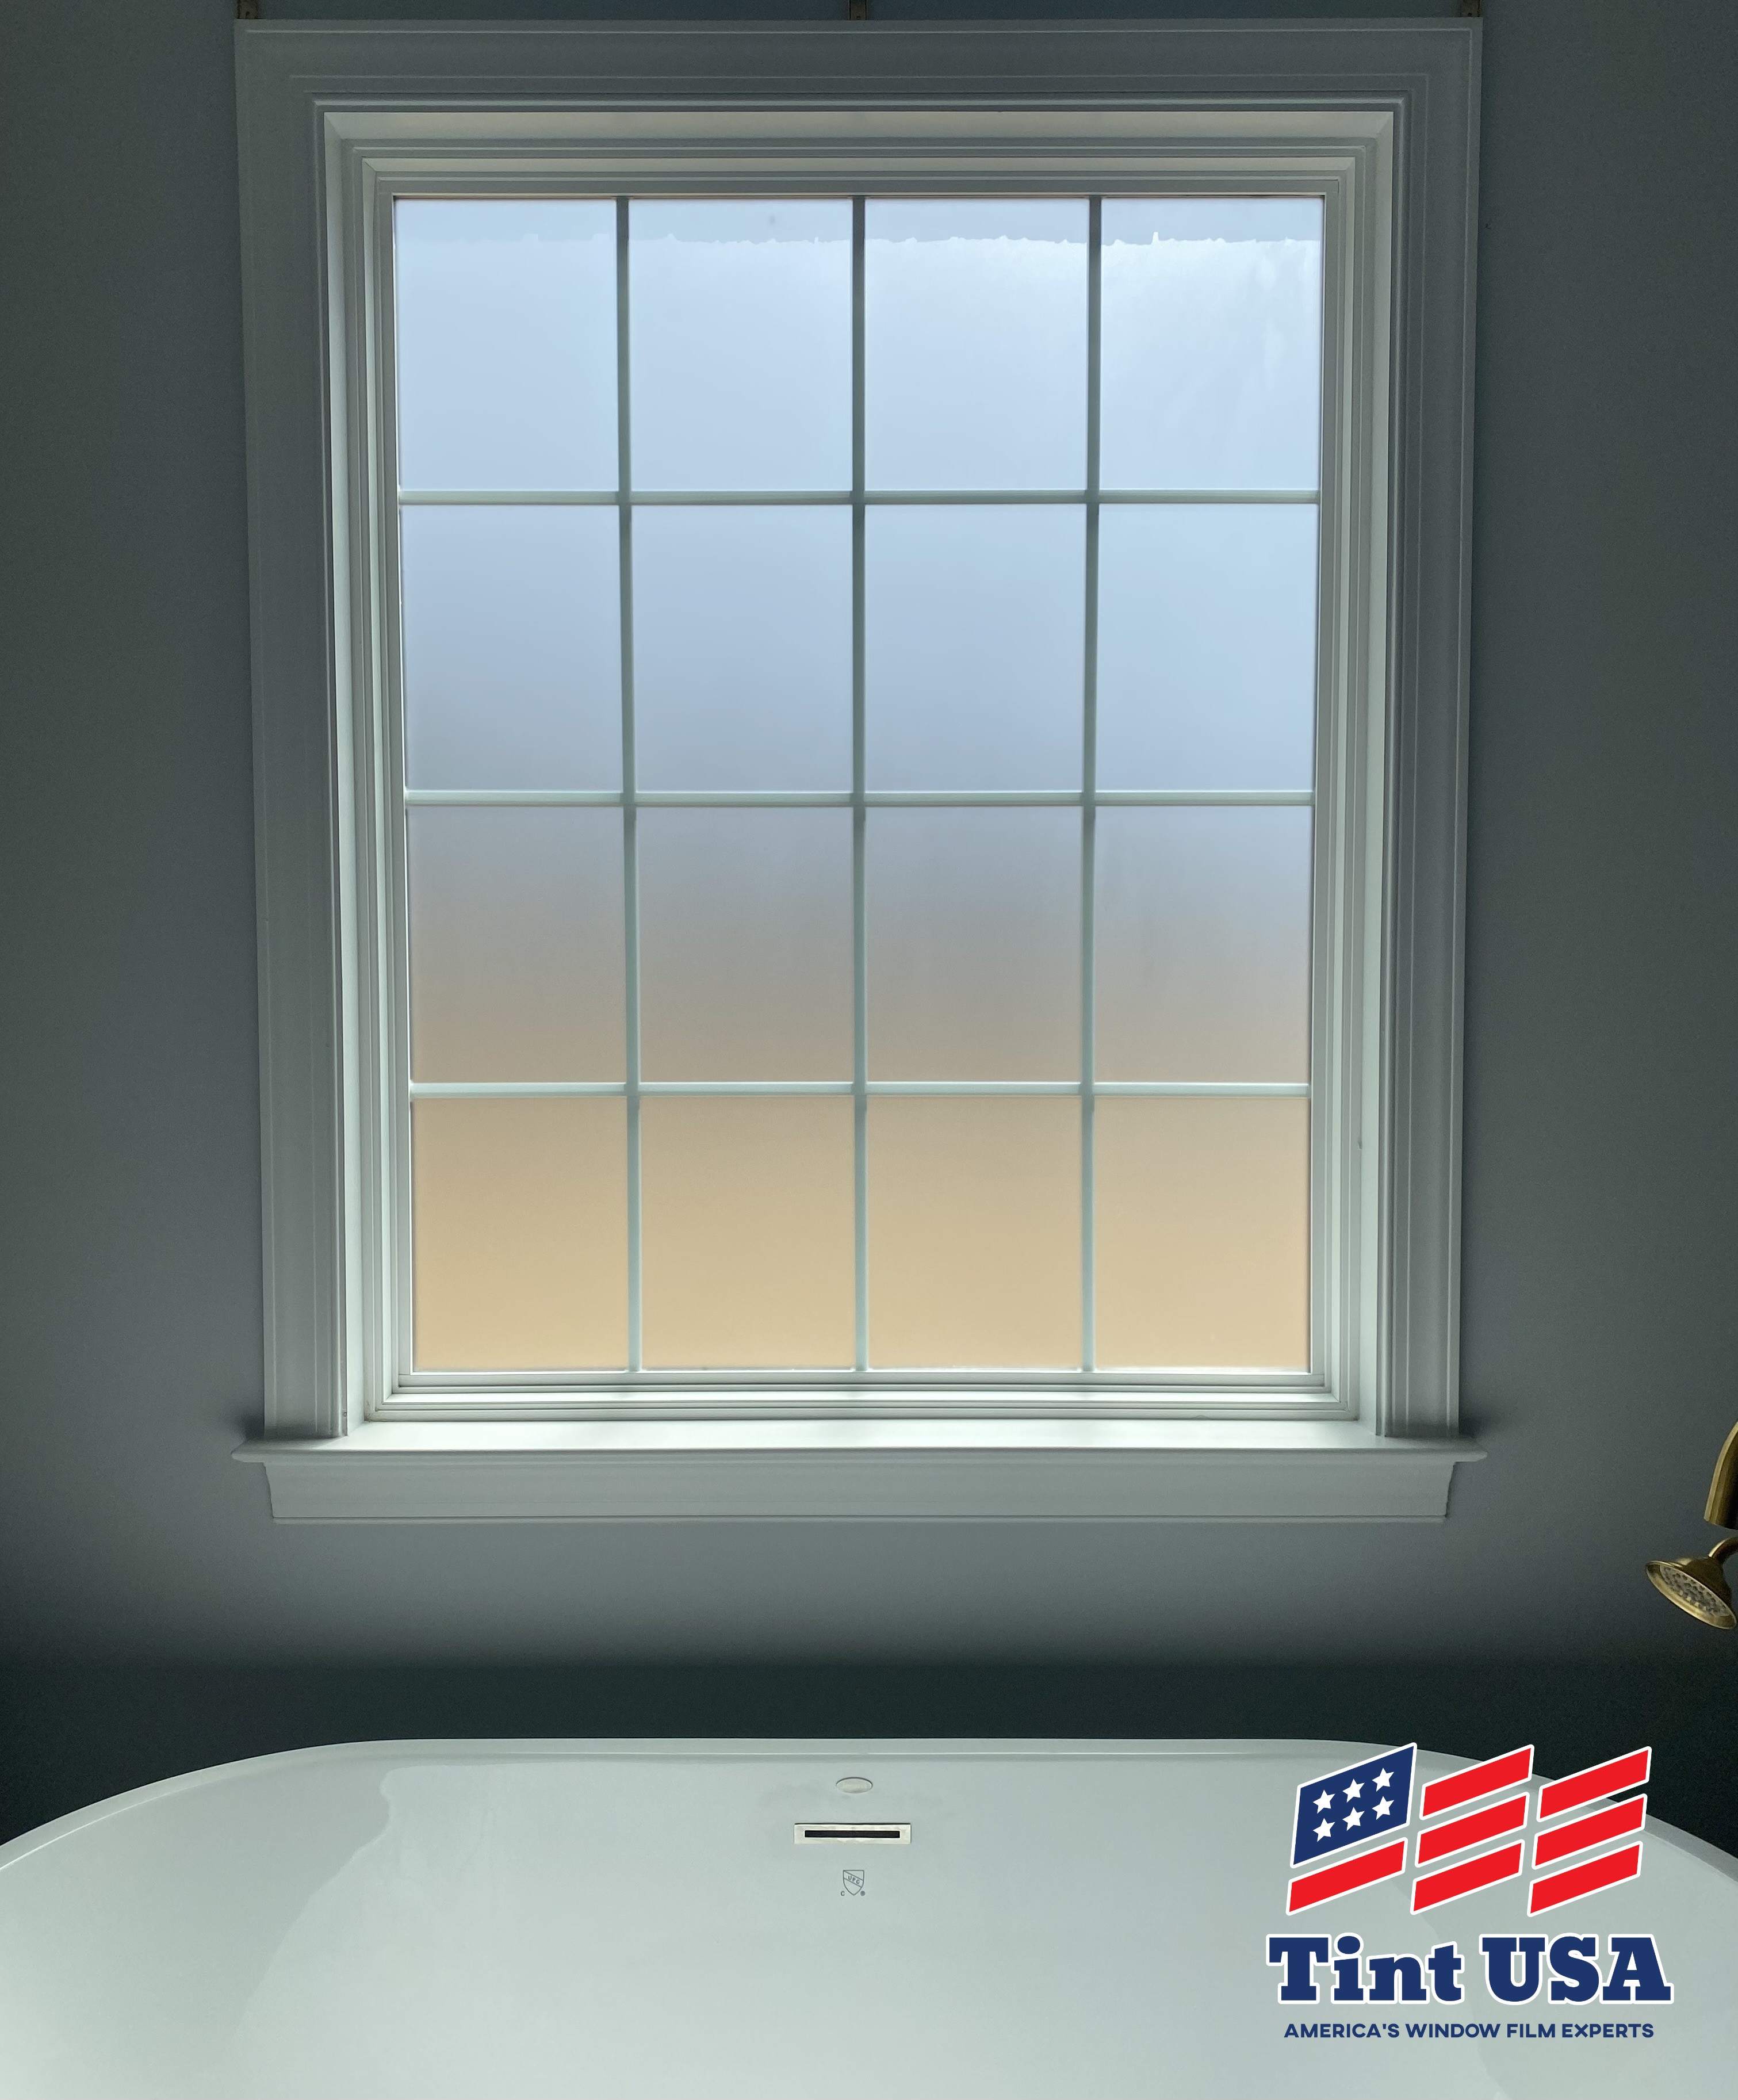 decorative window film can help increase privacy